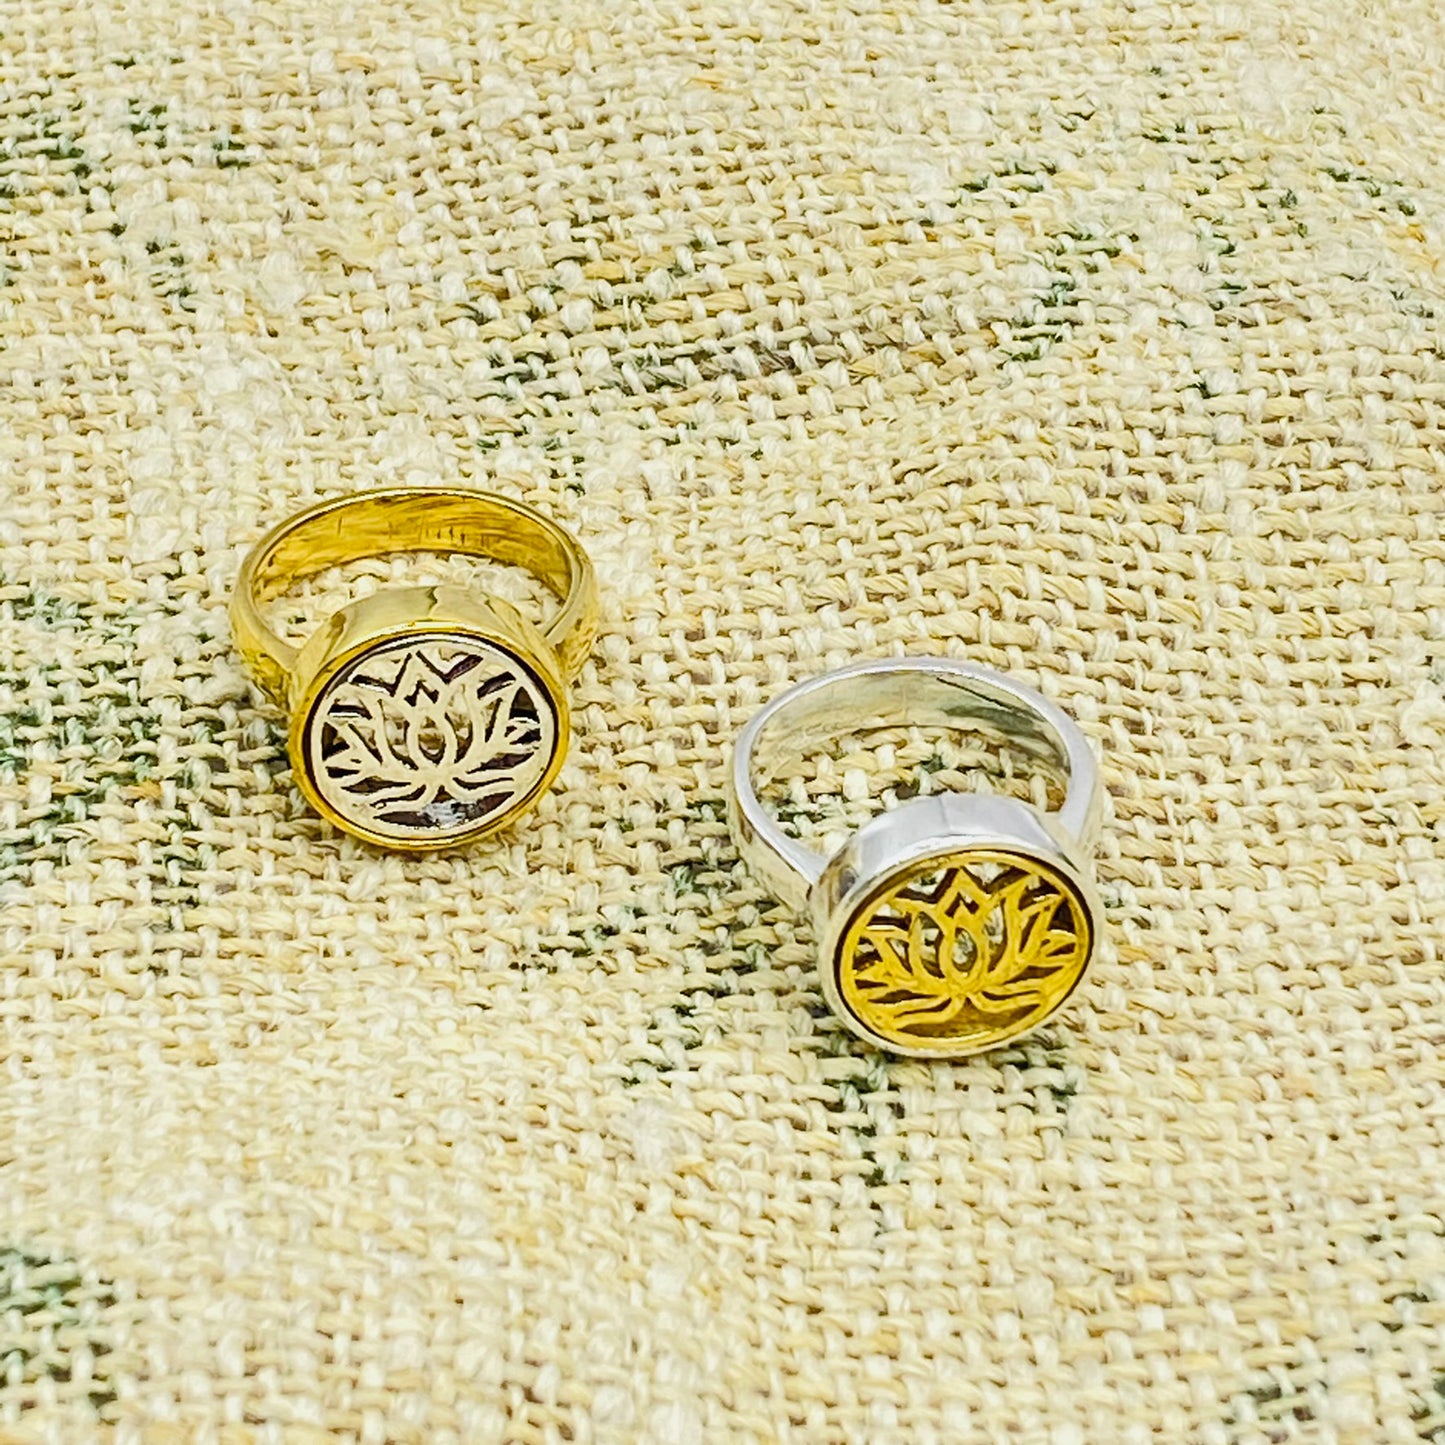 Handmade Lotus Rings, Gold Filled Jewelry, Silver Dainty Rings, Spiritual Rings, Gift For Her, Flower Ring, Bohemian Jewelry